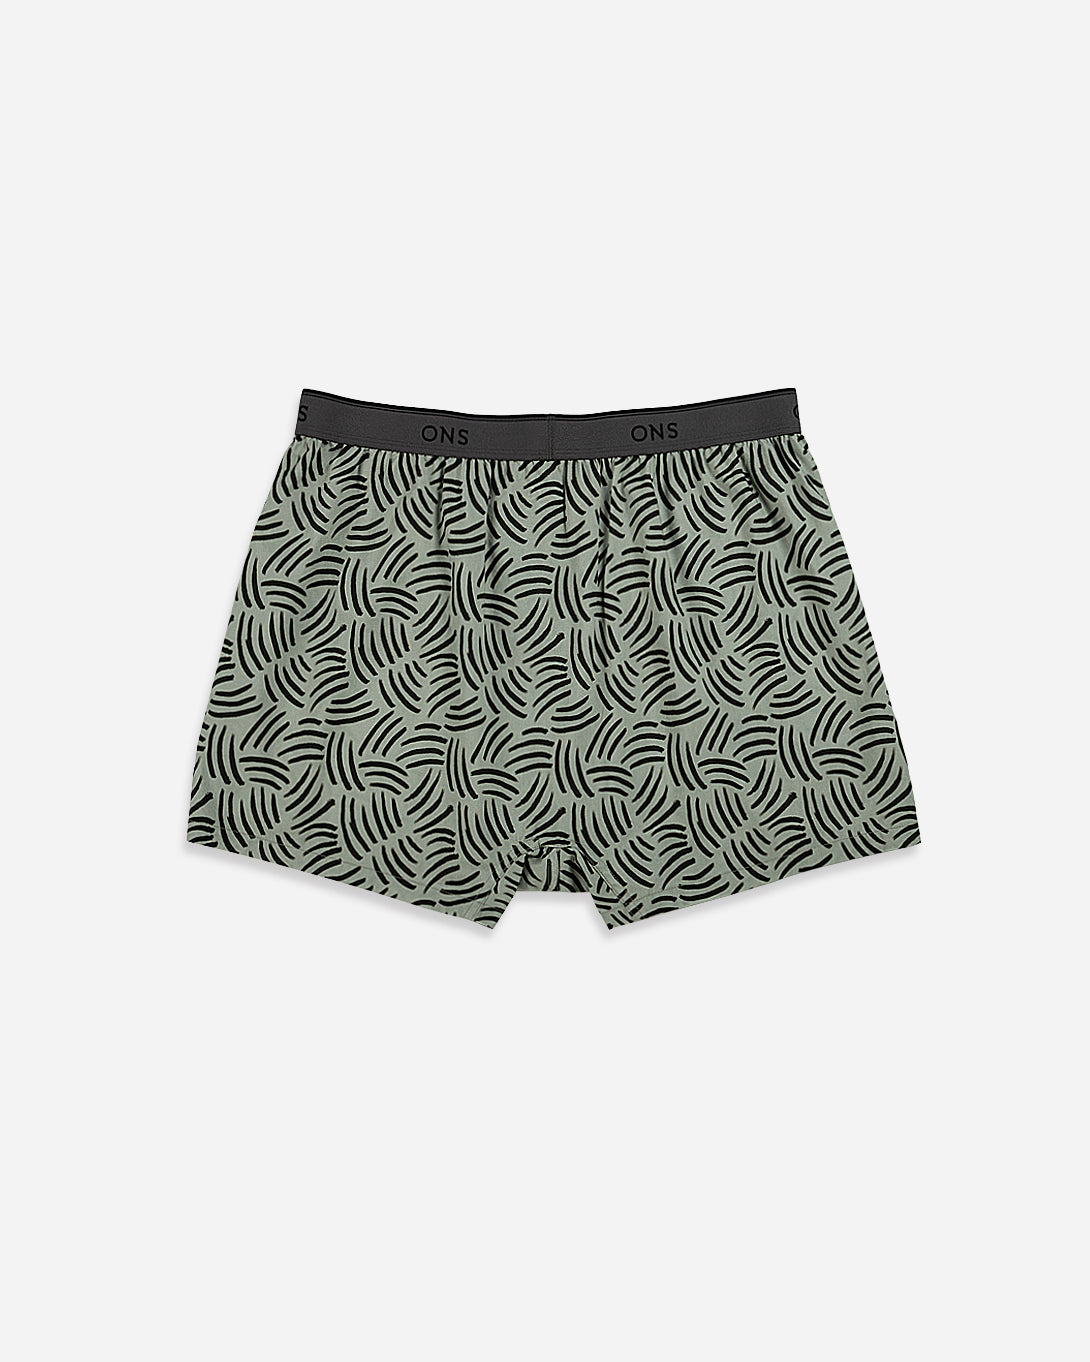 Seagrass/Navy Boxer Trunk ONS Clothing Mens Two Piece Essential Boxers